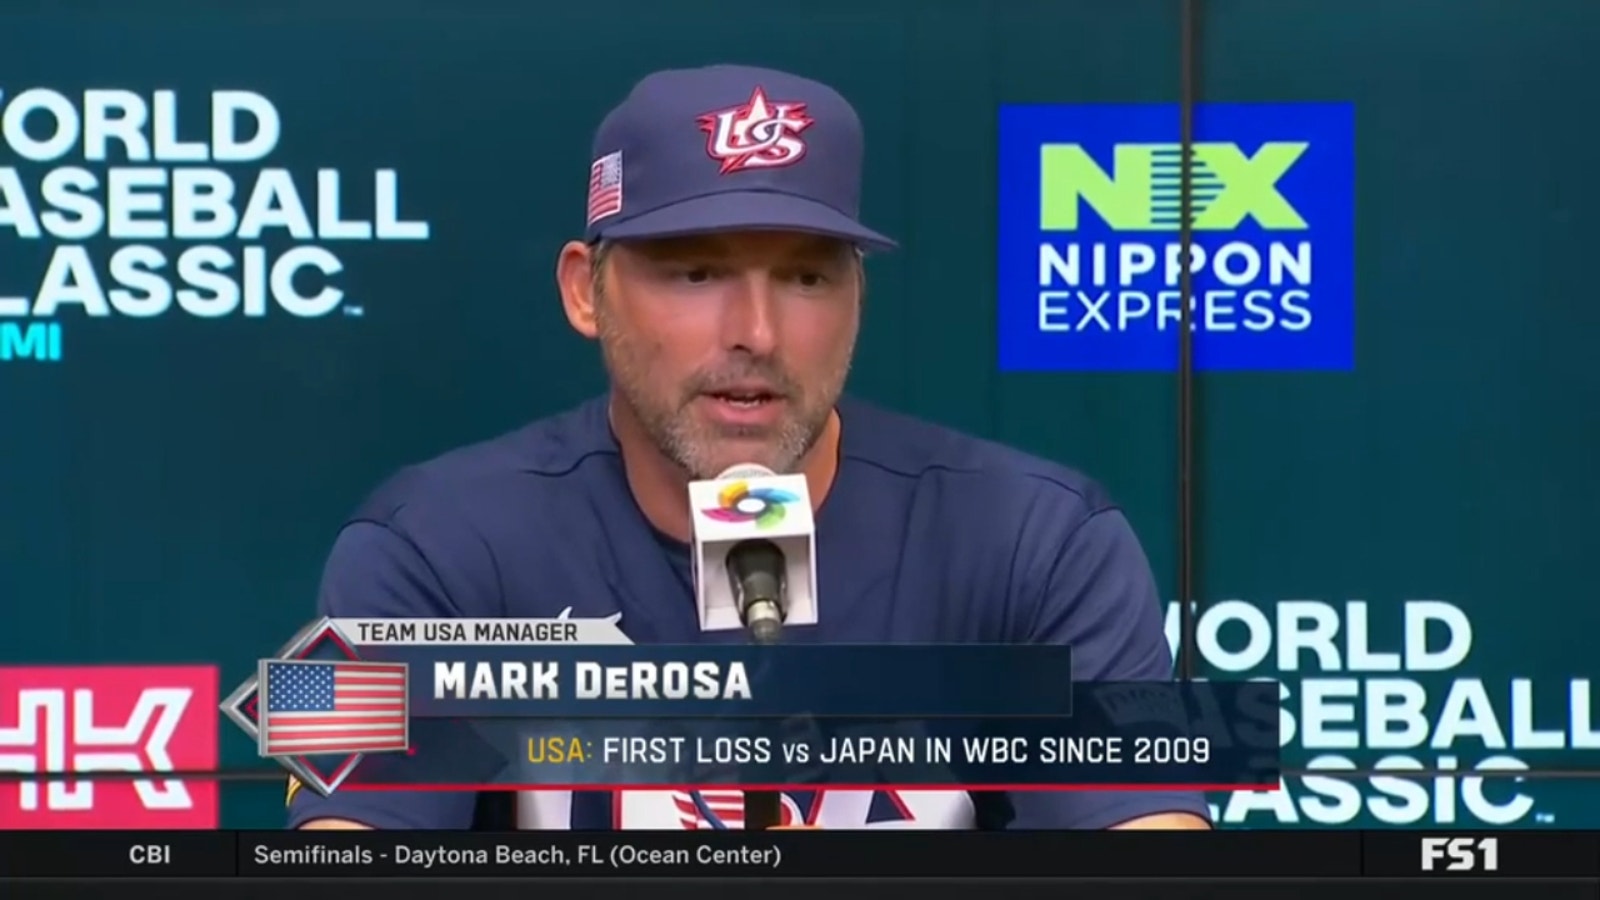 Mark DeRosa says he is extremely proud of how Team USA came together